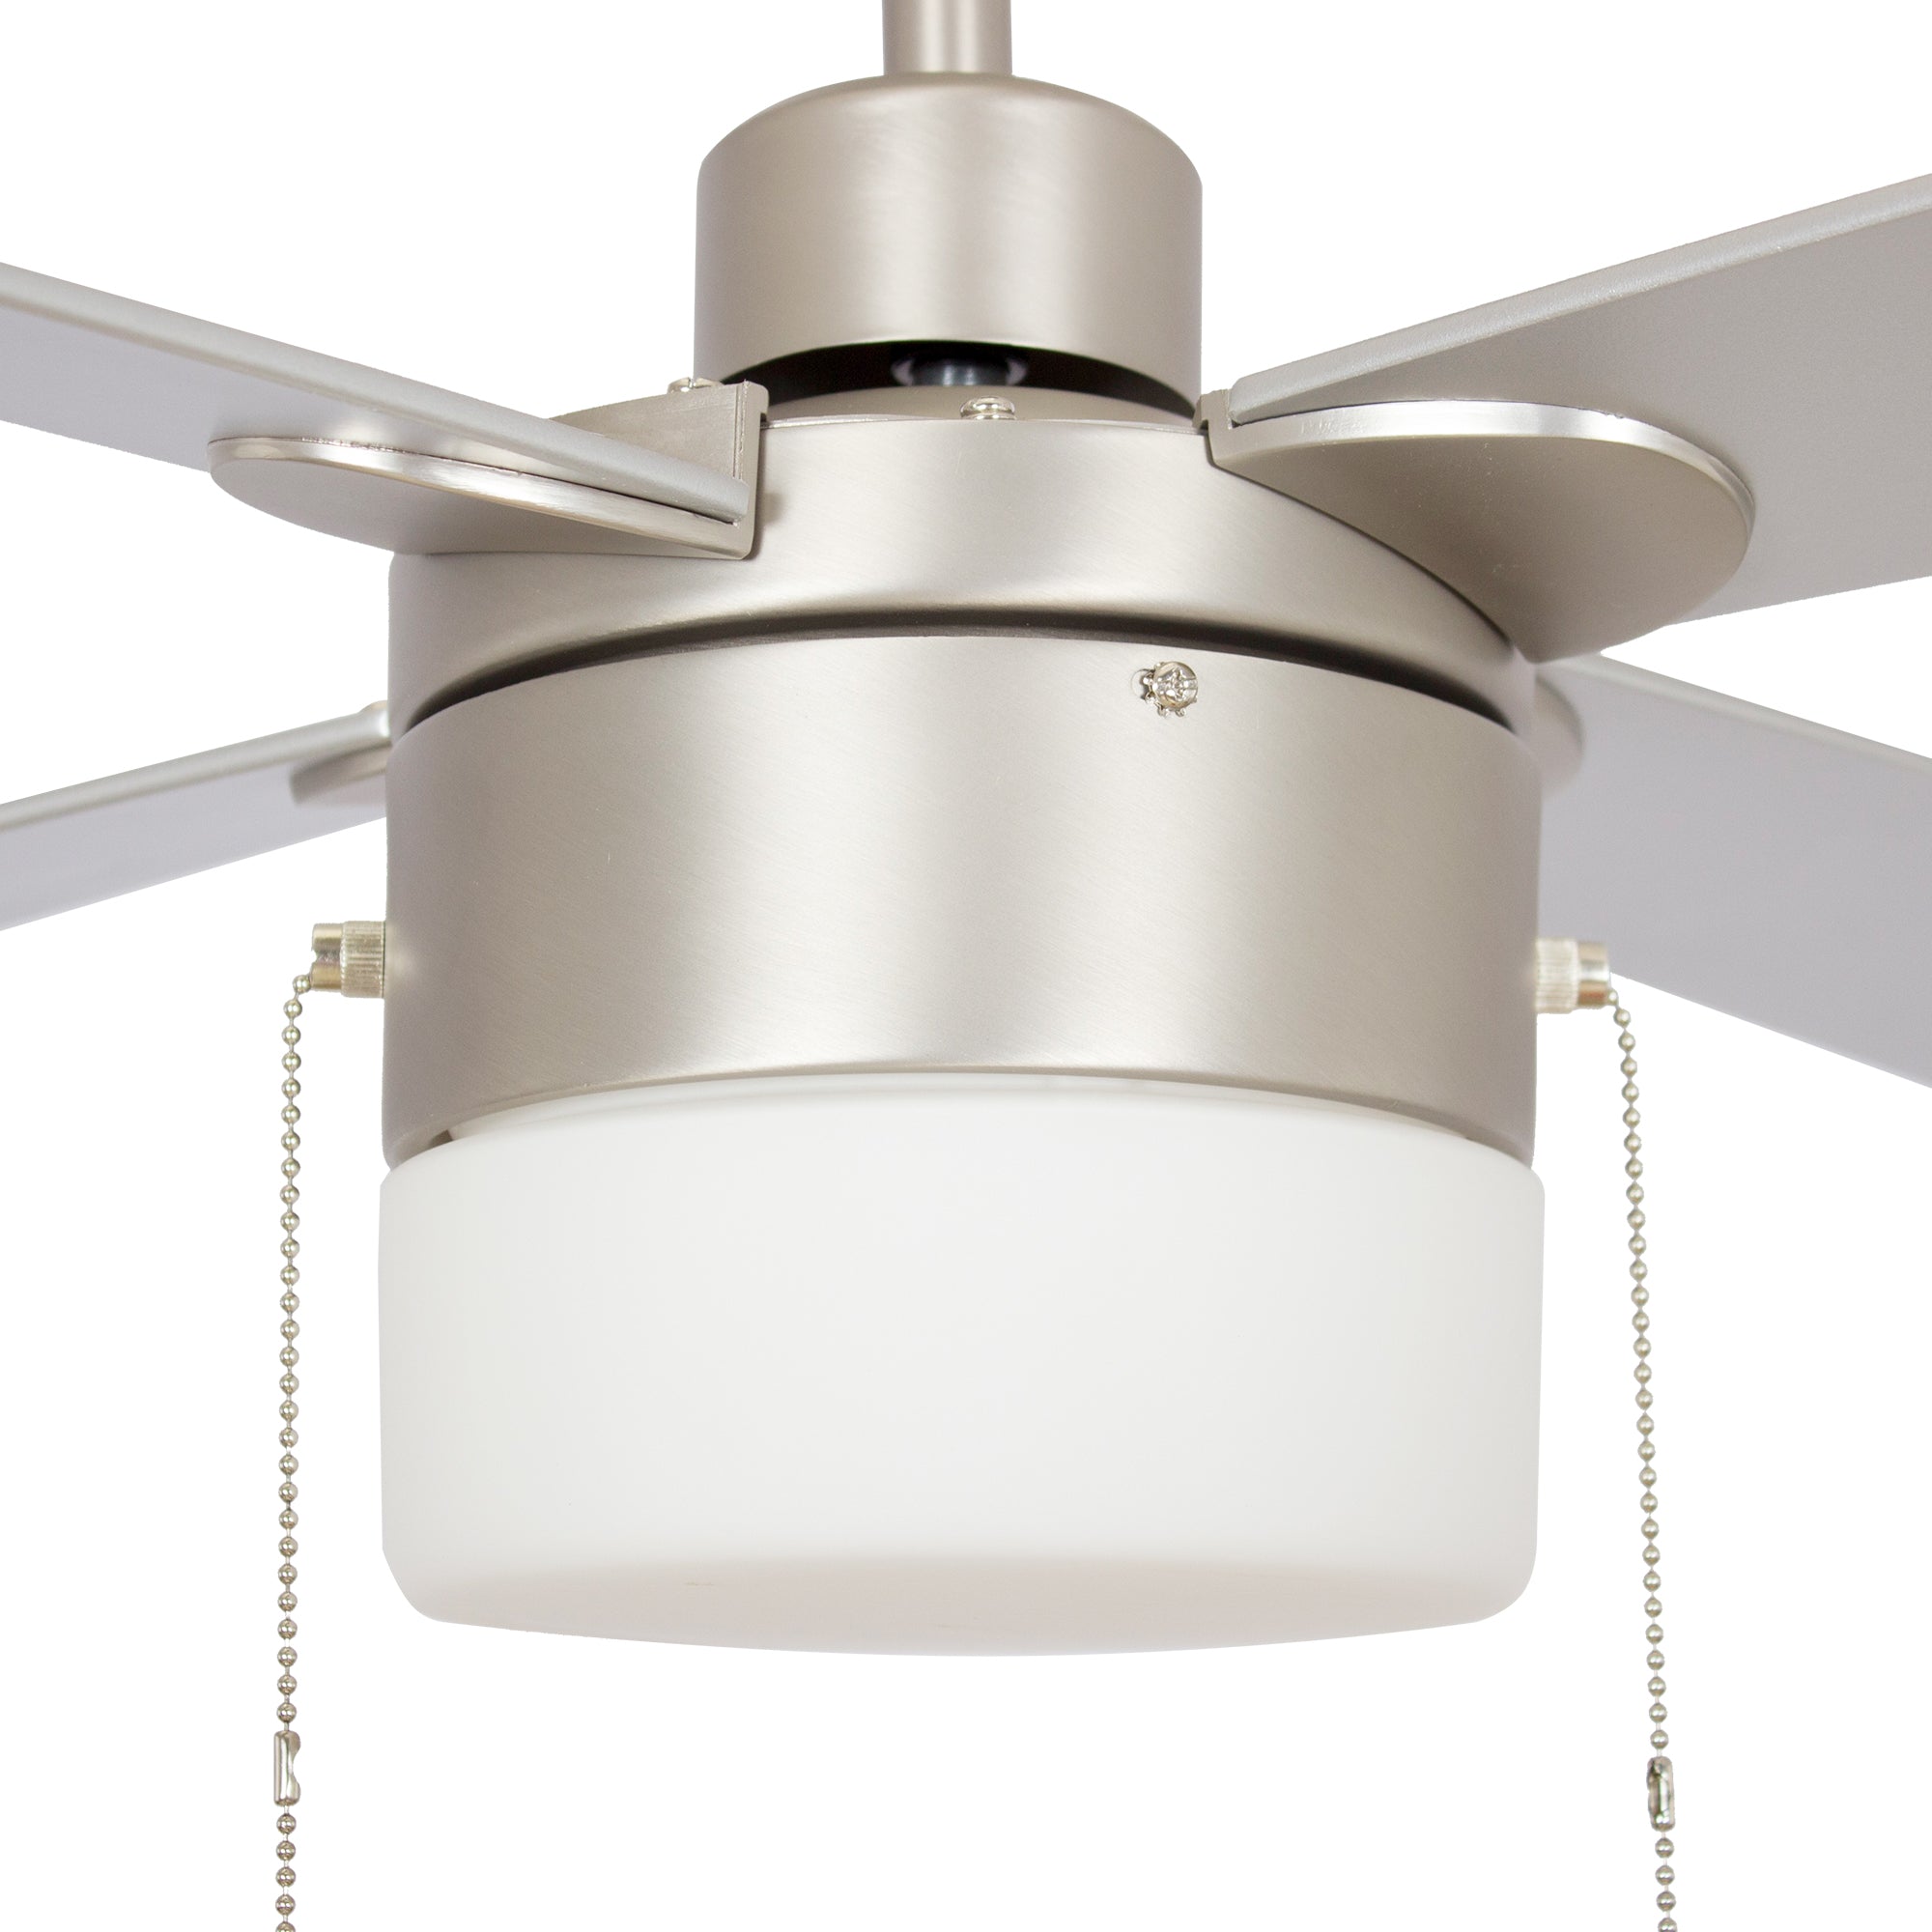 This Smafan Alrich 52&#39;&#39;Ceiling Fan keeps your space cool, bright, and stylish. It is a soft modern masterpiece perfect for your large indoor living spaces. This Model ceiling fan is a simplicity designing with Black finish, use Medium Density Fiberboard  blades and compatible with LED bulb and pull chain. The fan feature  pull chain switch to set fan speed and light bulb preferences 